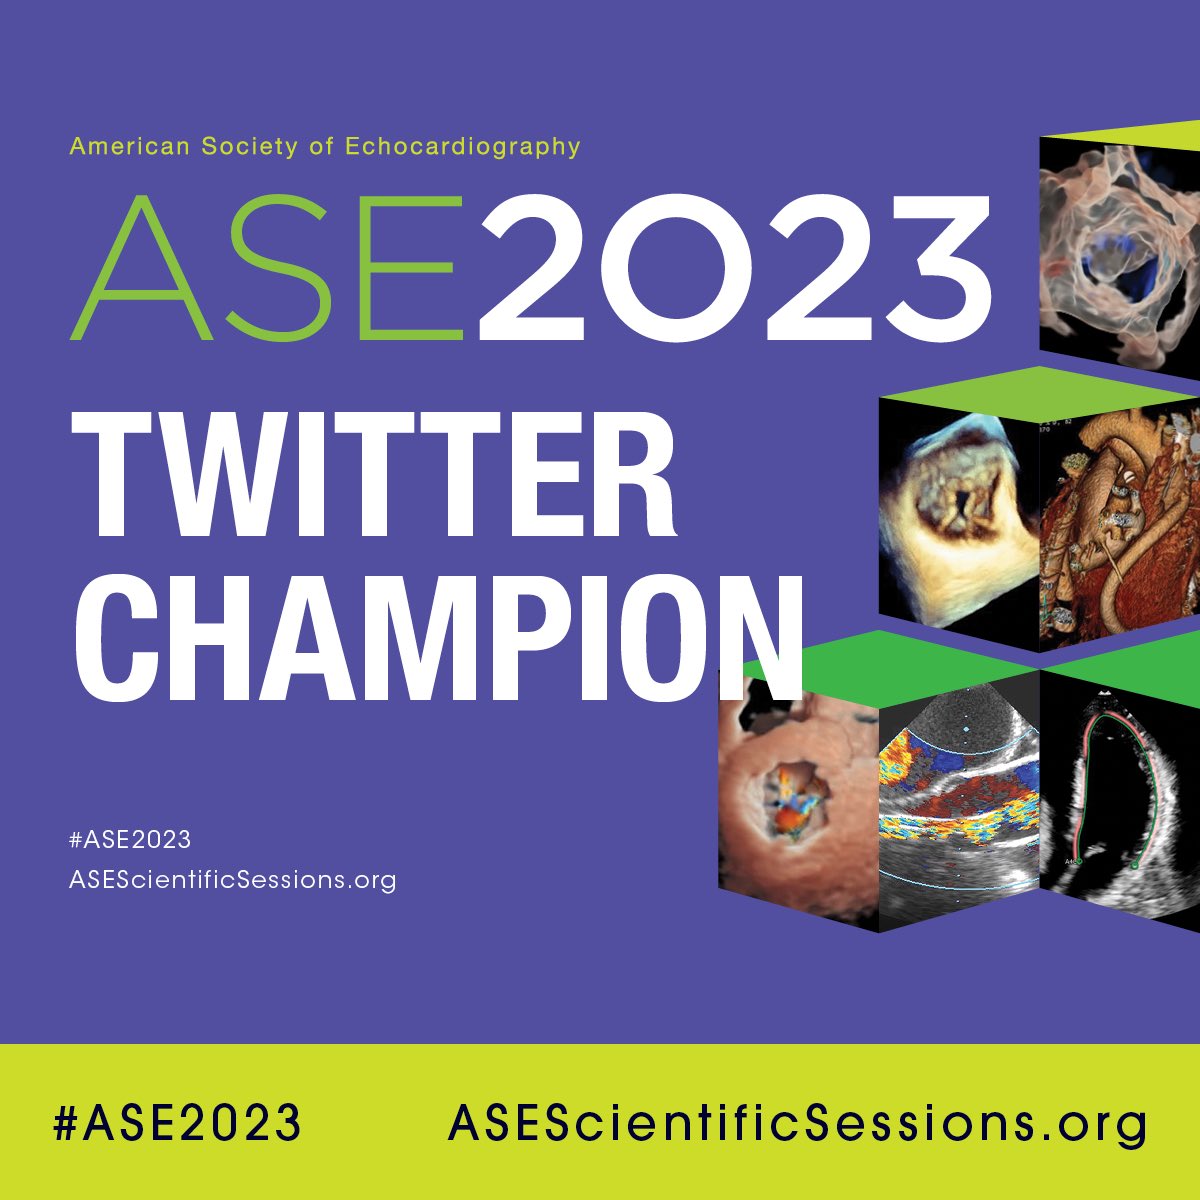 Attending #ASE2023 @ASE360 Scientific Sessions in National Harbor in June? Follow me and other @Twitter champions to learn what is going on & when during the conference. Please RT. @iamritu @EGarciaSayan @SLittleMD @RWASECEO @DavidWienerMD @purviparwani @mswami001 @nicoa002